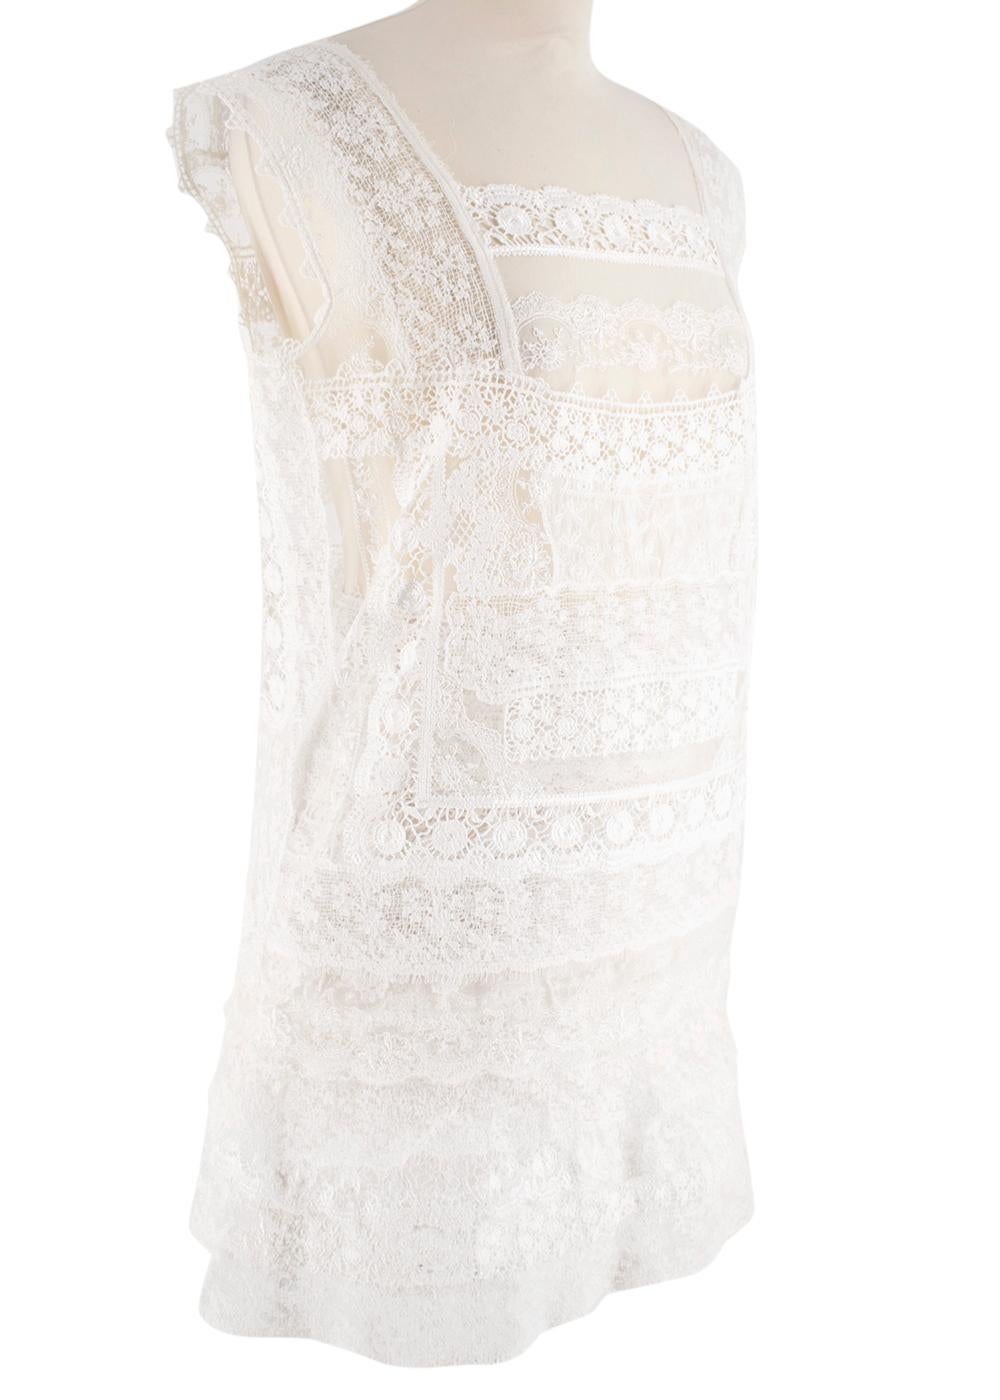 Ermanno Scervino Cream Lace Mini Skirt and Top Set - Size US 4-6 For Sale 2